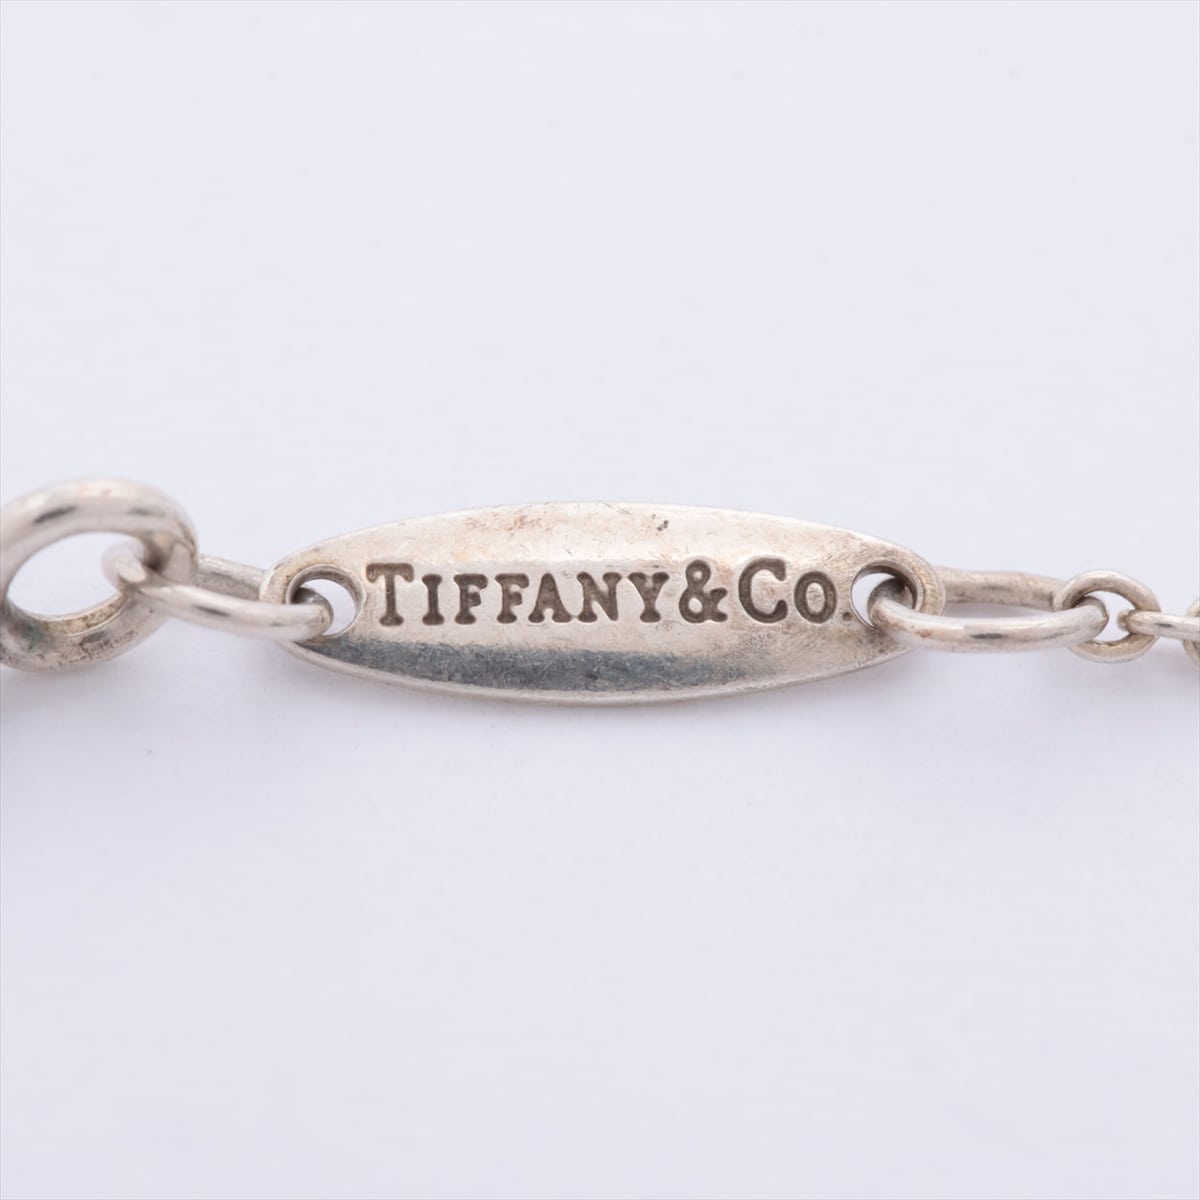 Tiffany By the Yard Necklace 925 1.5g Silver